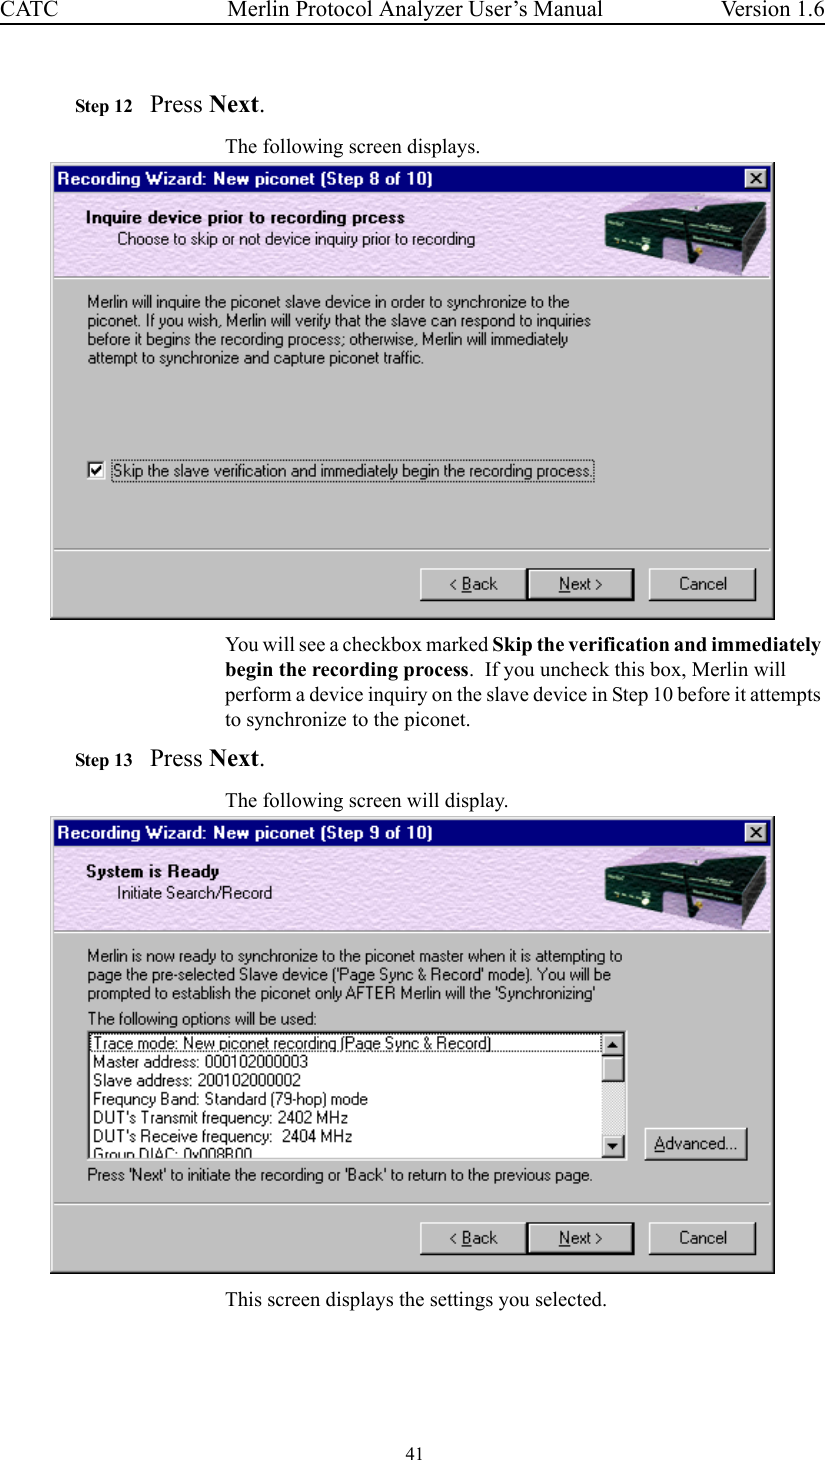  41 Merlin Protocol Analyzer User’s ManualCATC Version 1.6Step 12 Press Next. The following screen displays.You will see a checkbox marked Skip the verification and immediately begin the recording process.  If you uncheck this box, Merlin will perform a device inquiry on the slave device in Step 10 before it attempts to synchronize to the piconet.Step 13 Press Next.The following screen will display.This screen displays the settings you selected.